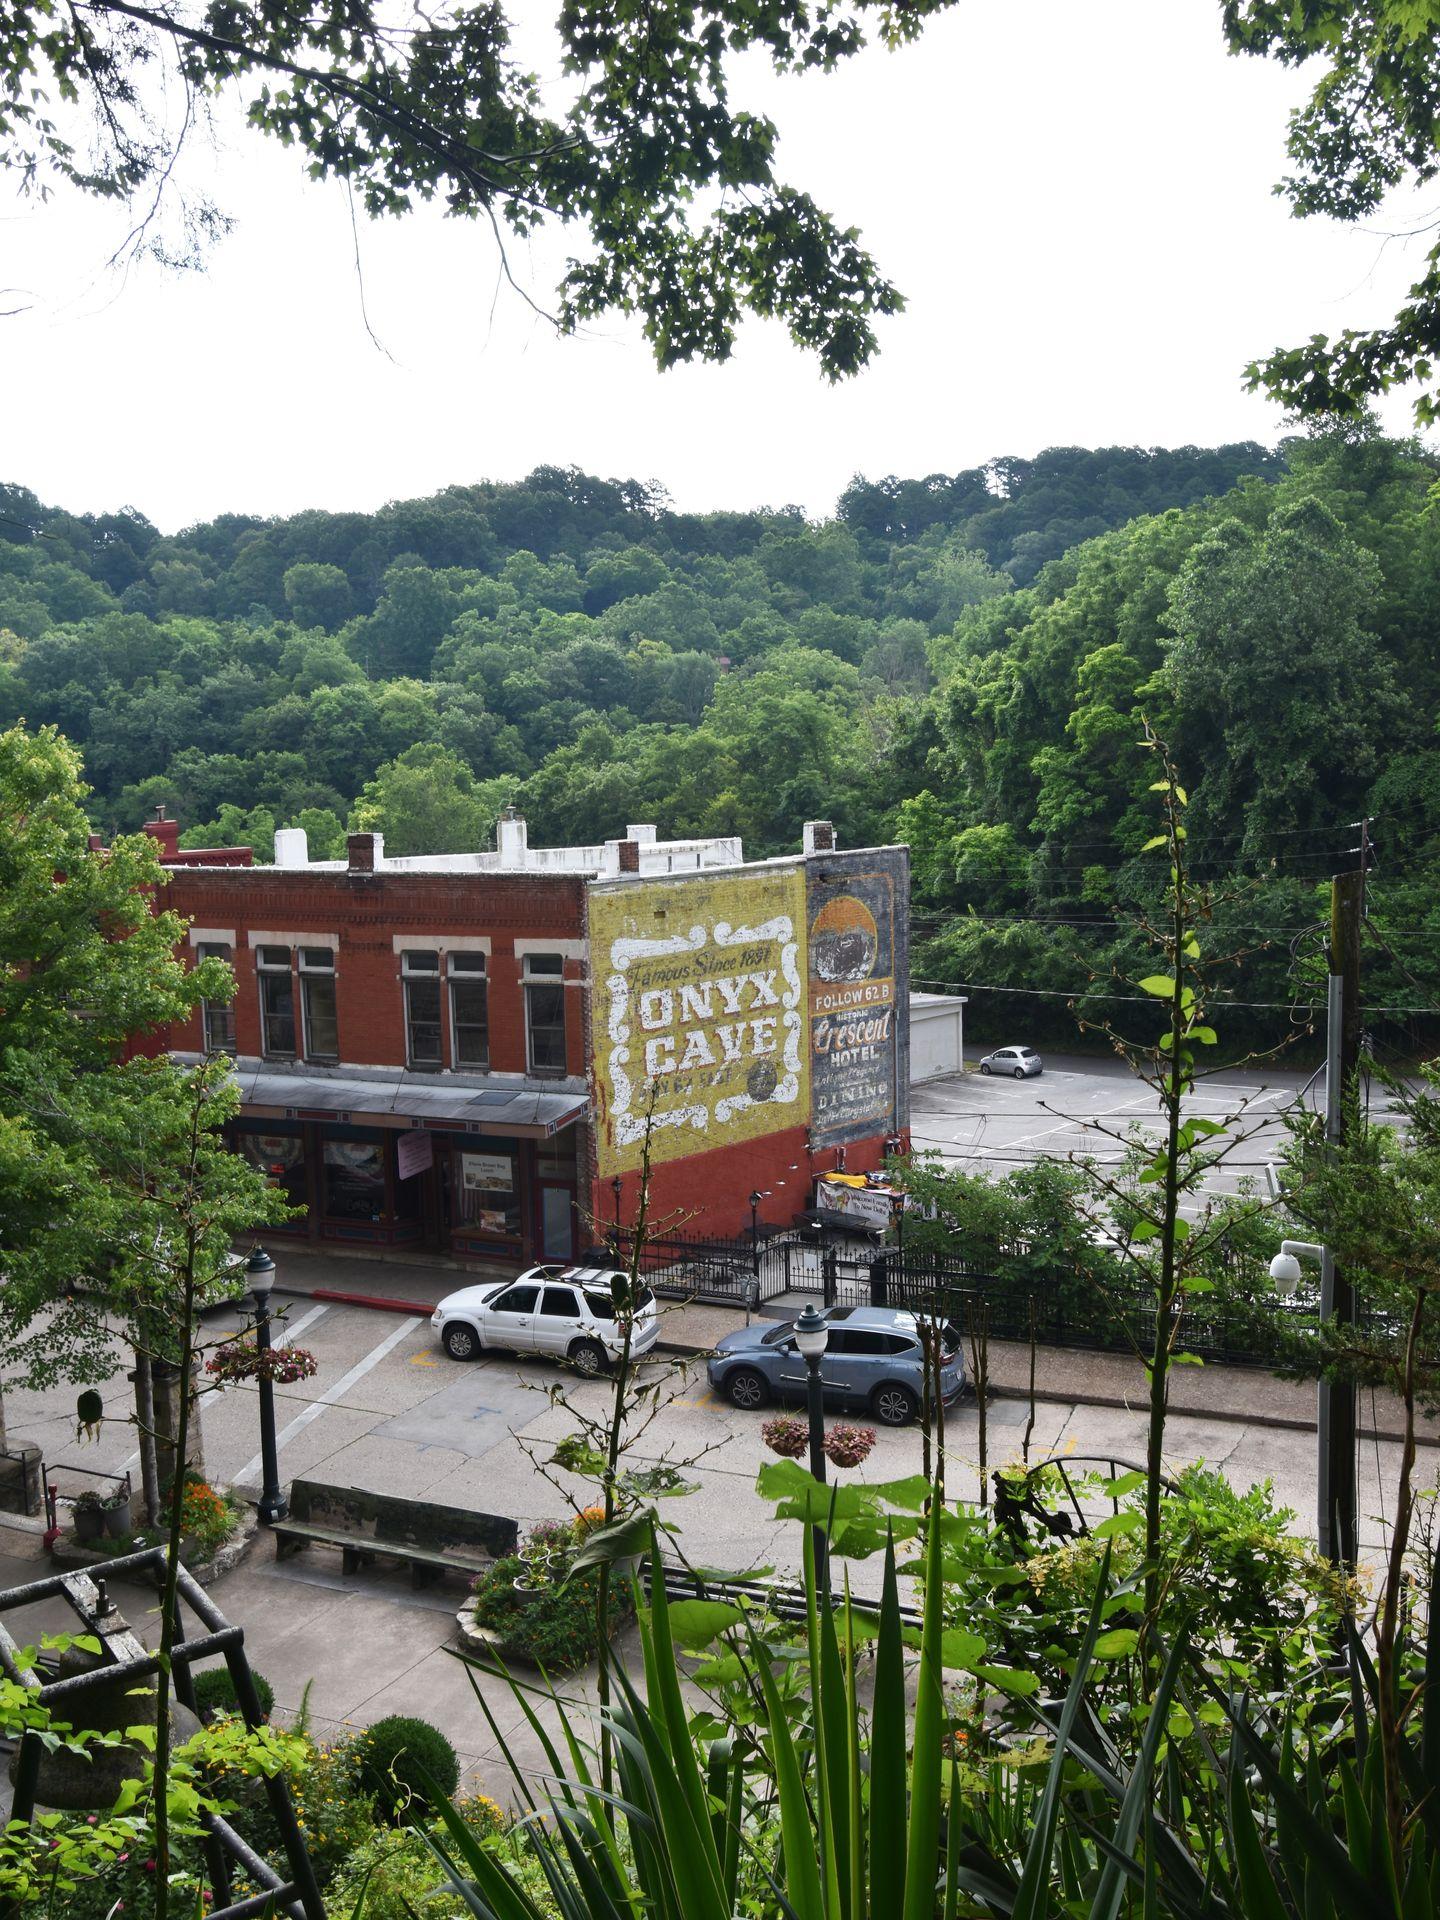 Looking down at some buildings in downtown Eureka Springs. There is a big mural that reads "Onyx Cave."